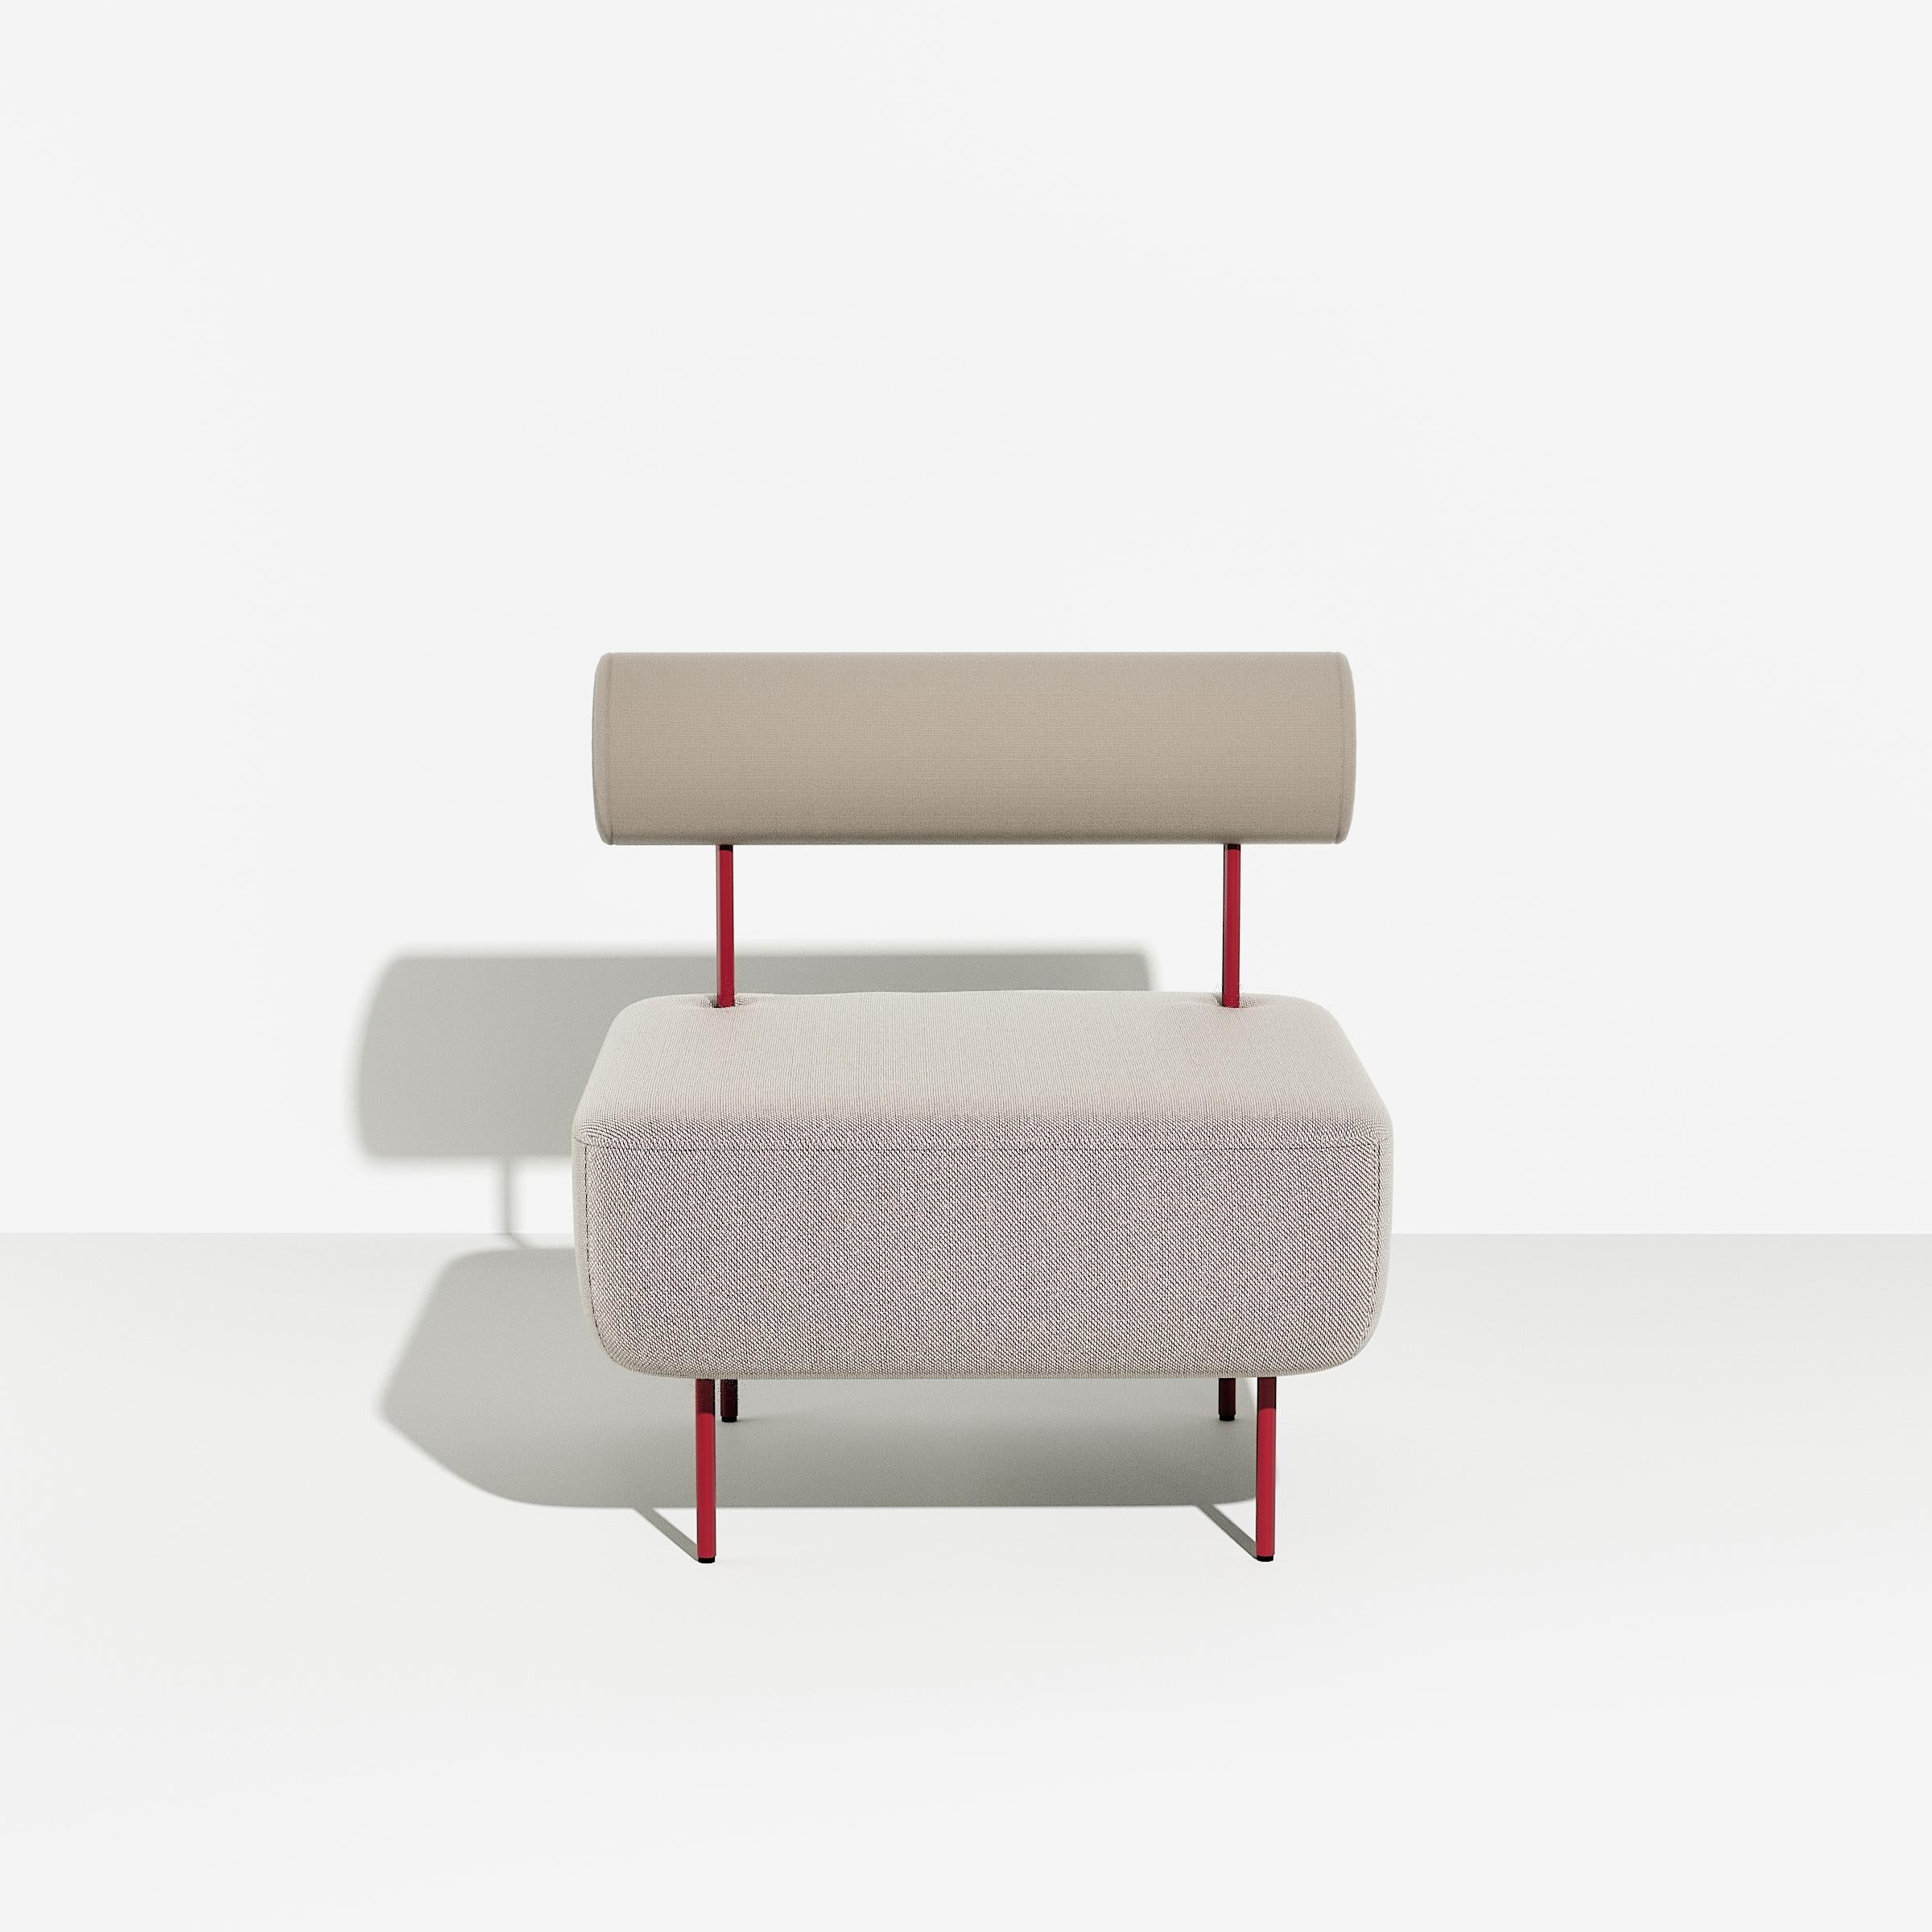 Petite Friture Medium Hoff Armchair in Grey-beige by Morten & Jonas, 2015

Hoff created by designer duo Morten & Jonas is a collection of two modular stools and two modular armchairs. they can combine to make a sofa as well an entire living room